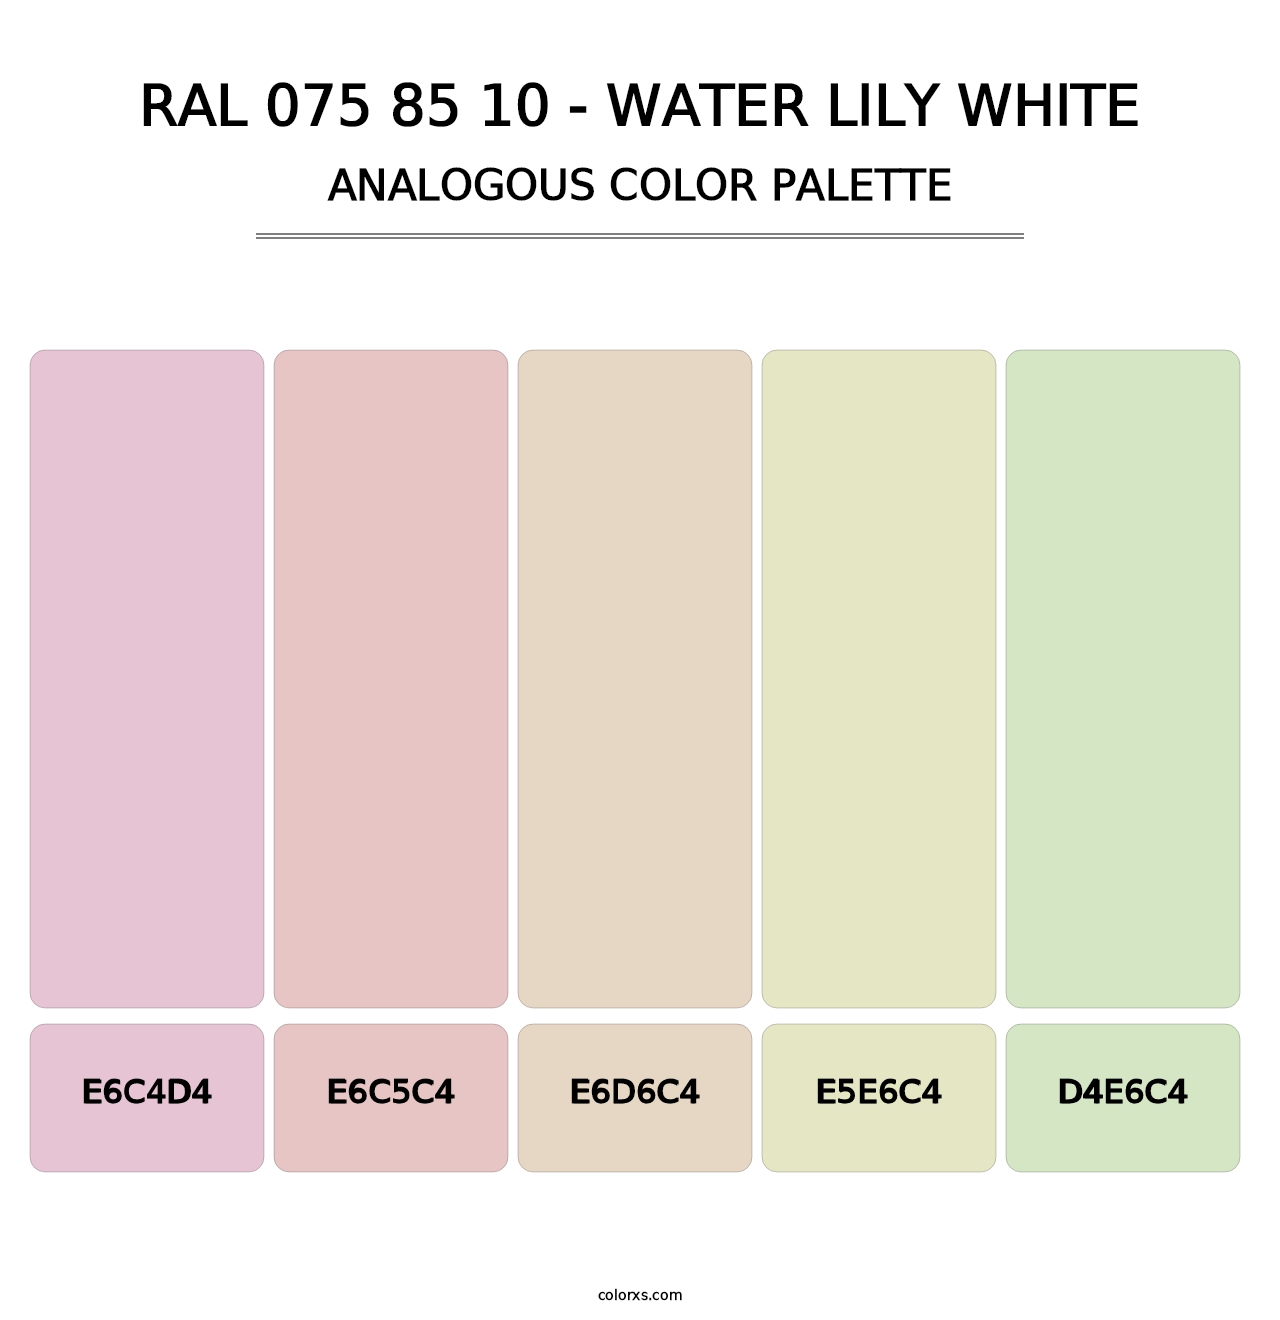 RAL 075 85 10 - Water Lily White - Analogous Color Palette